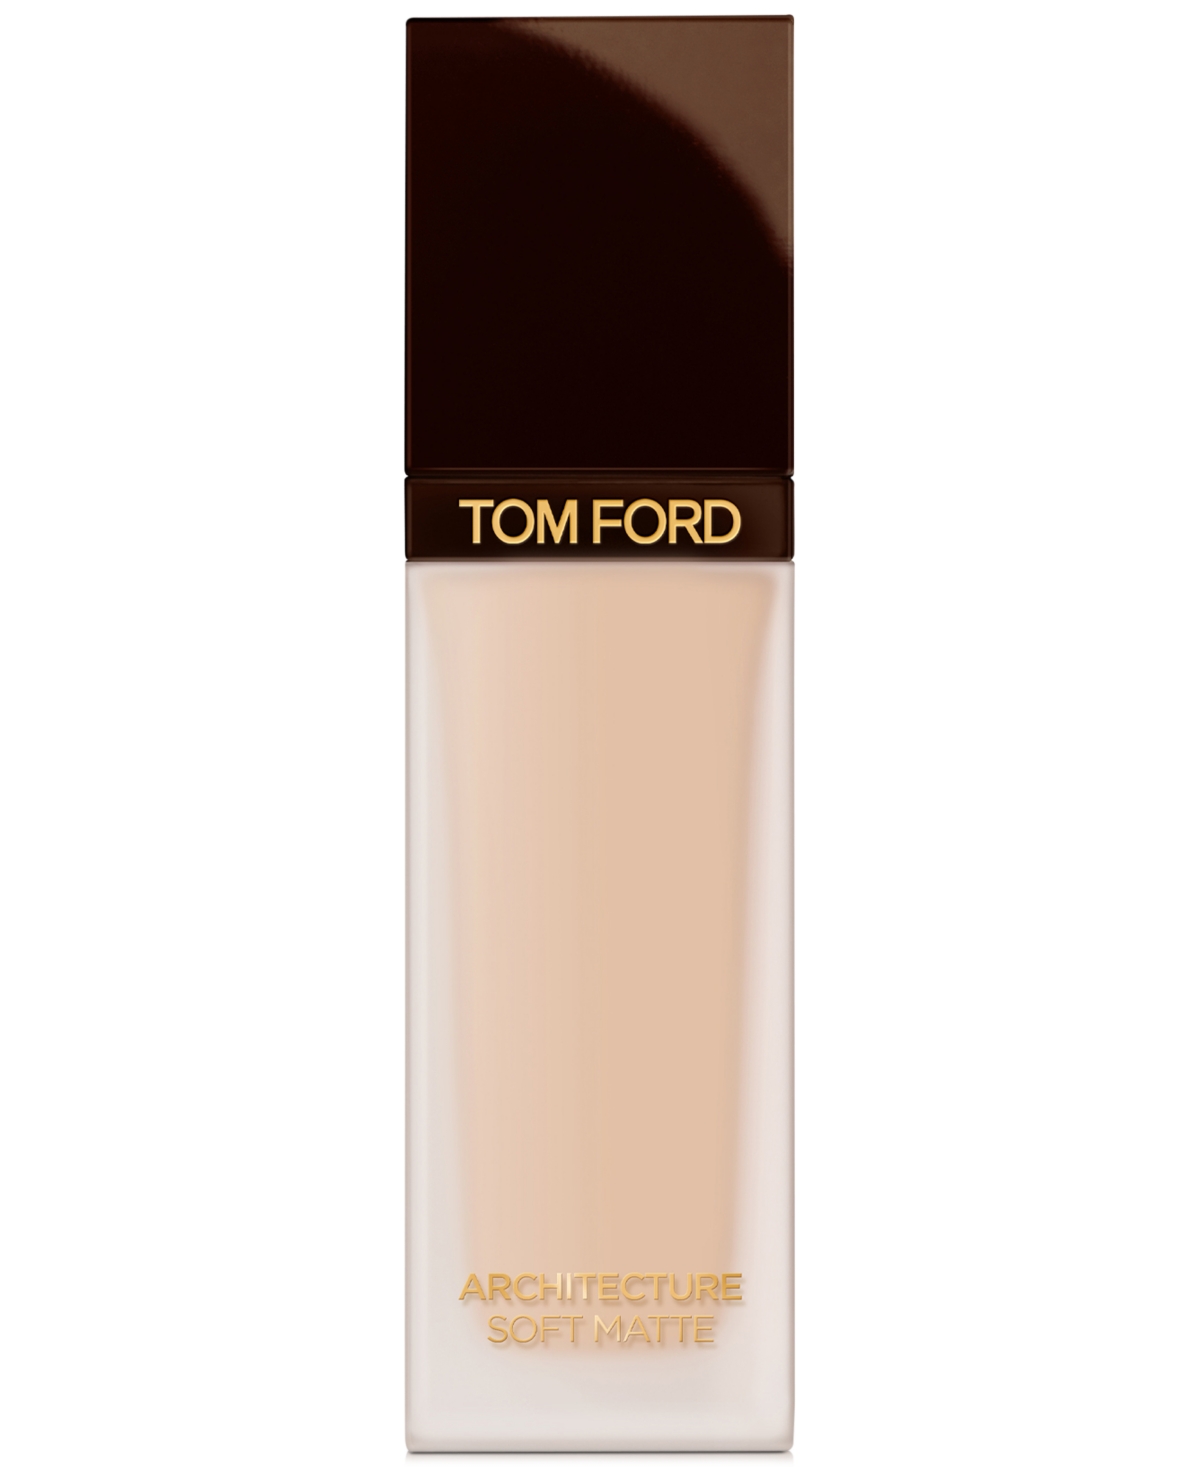 Shop Tom Ford Architecture Soft Matte Blurring Foundation In . Porcelain - Very Fair